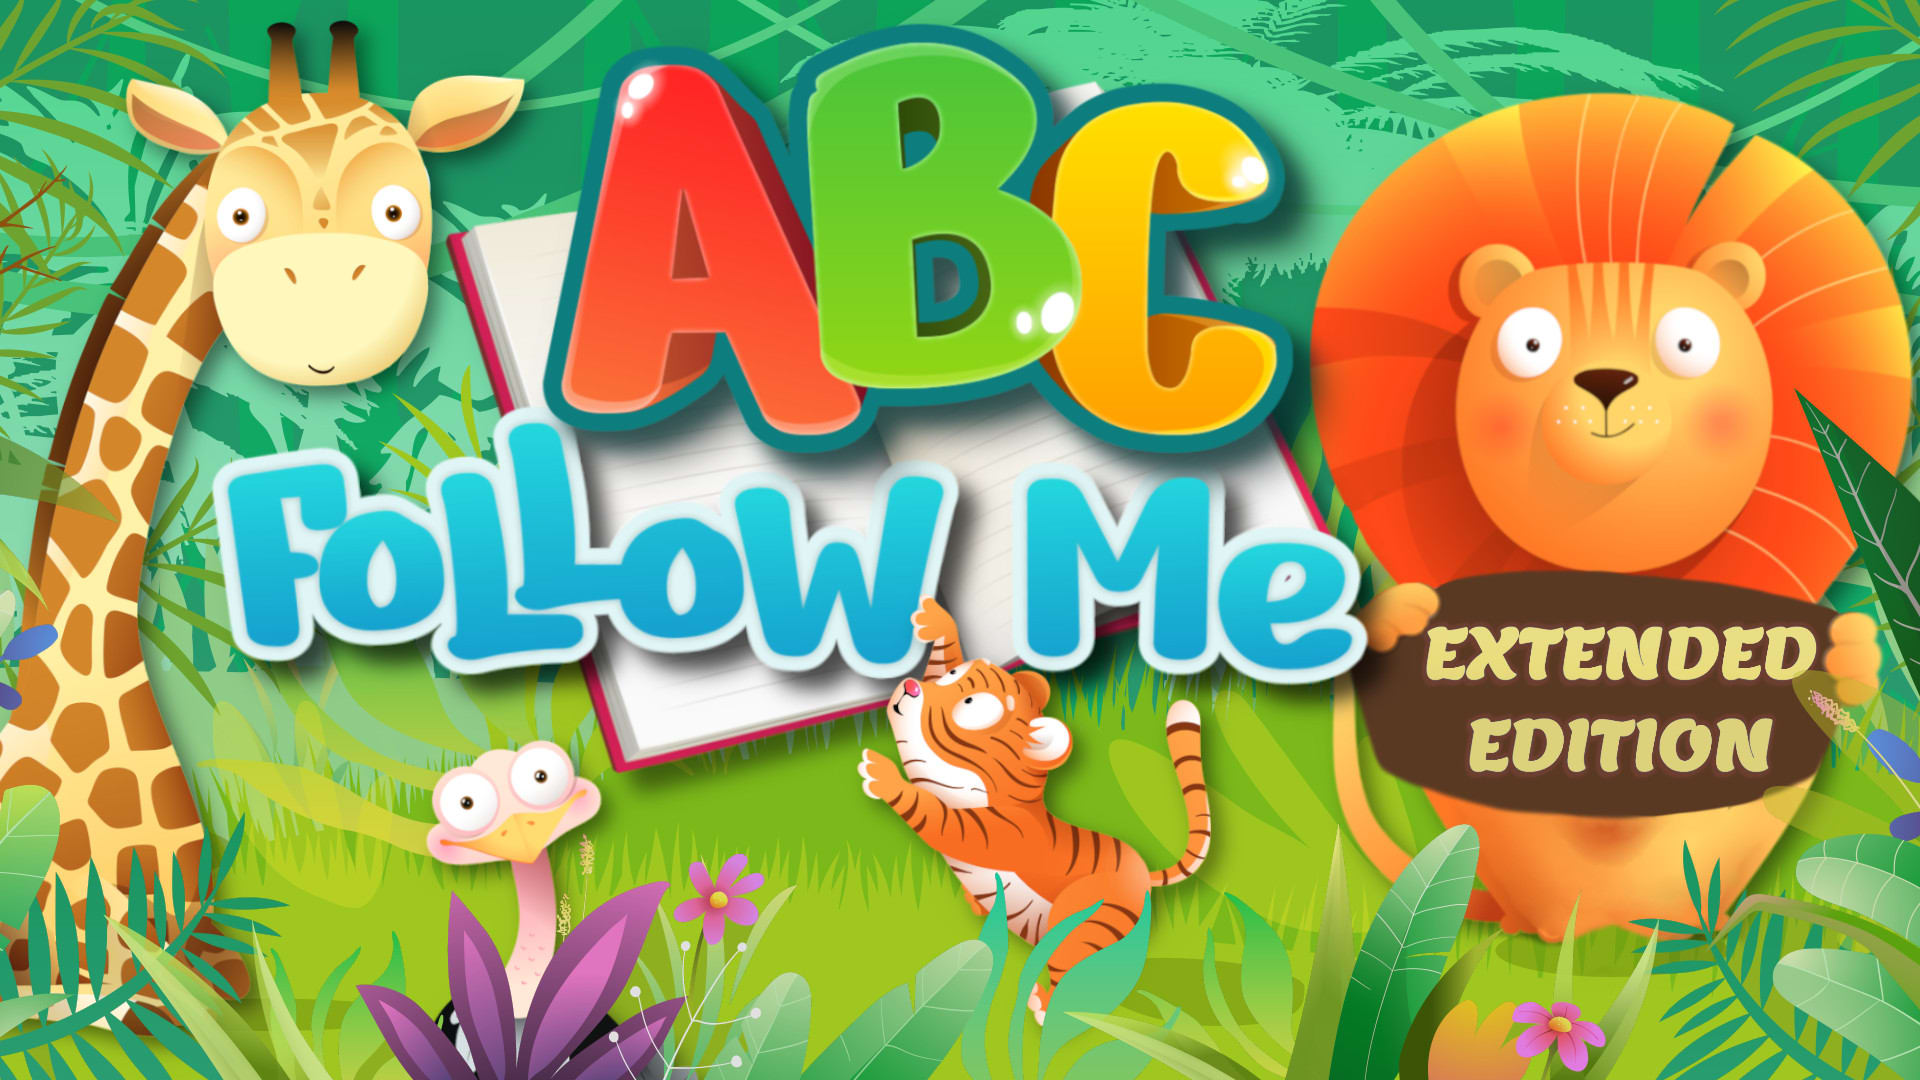 ABC Follow Me: Animals Extended Edition